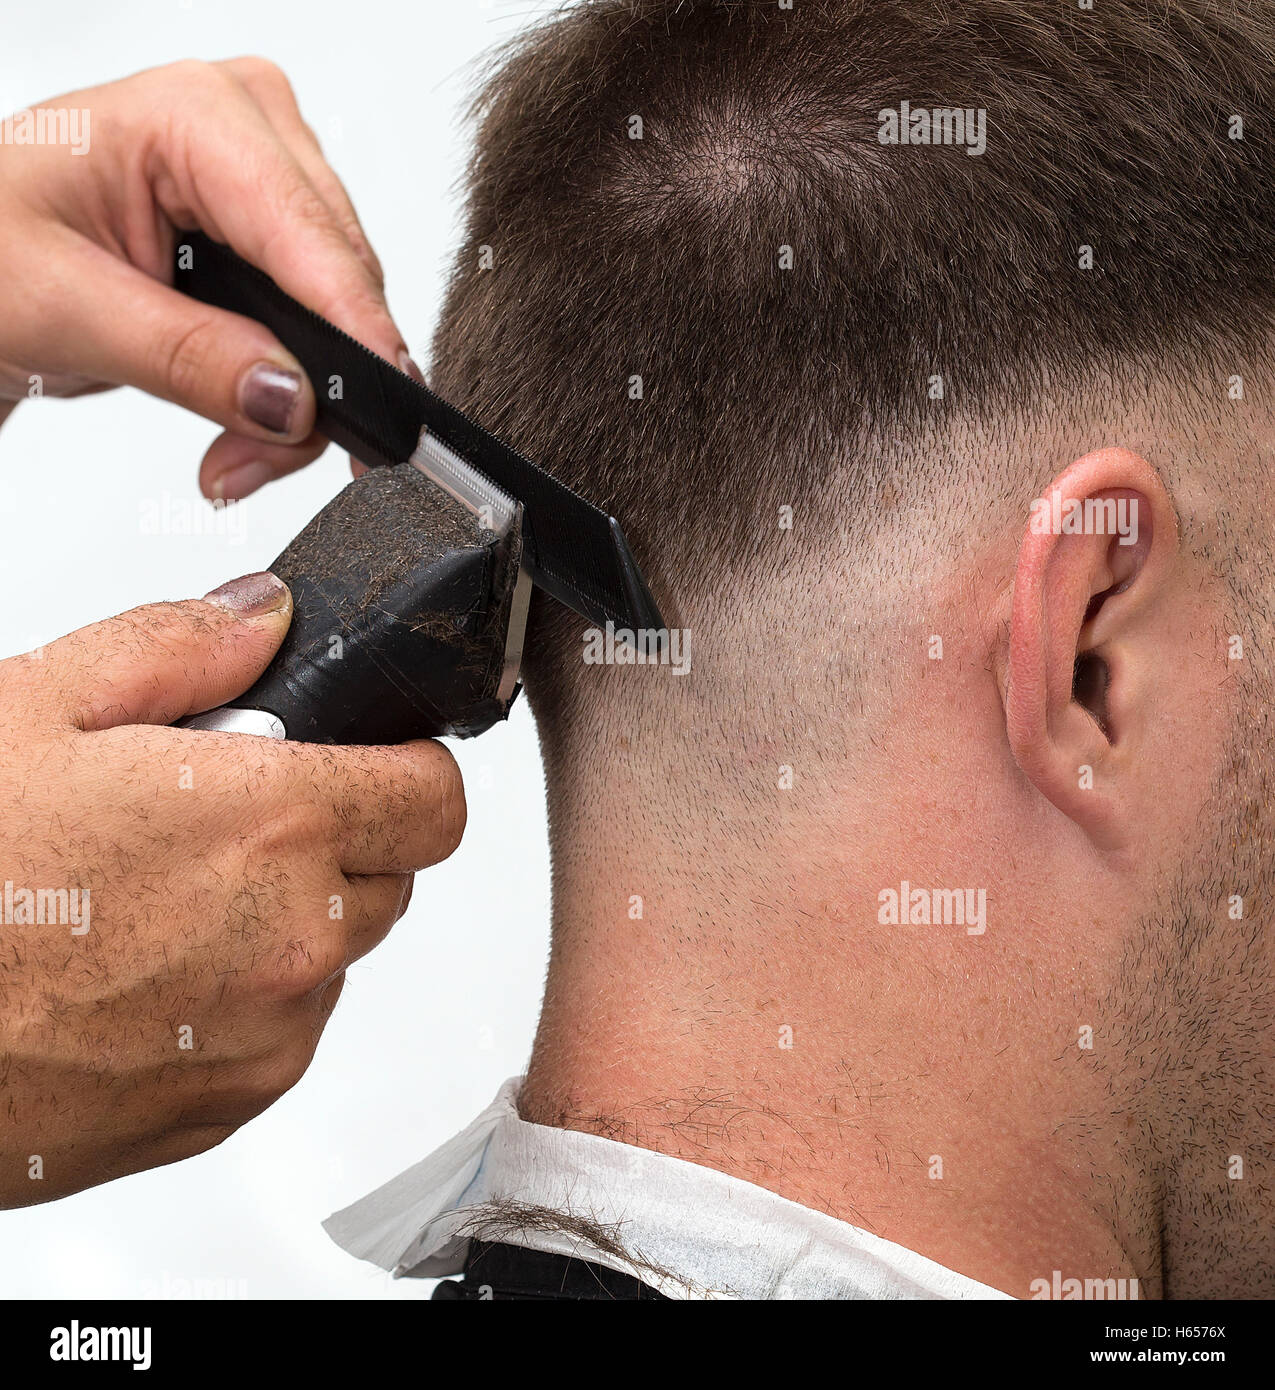 At the hairdresser getting a new male haircut. Stock Photo